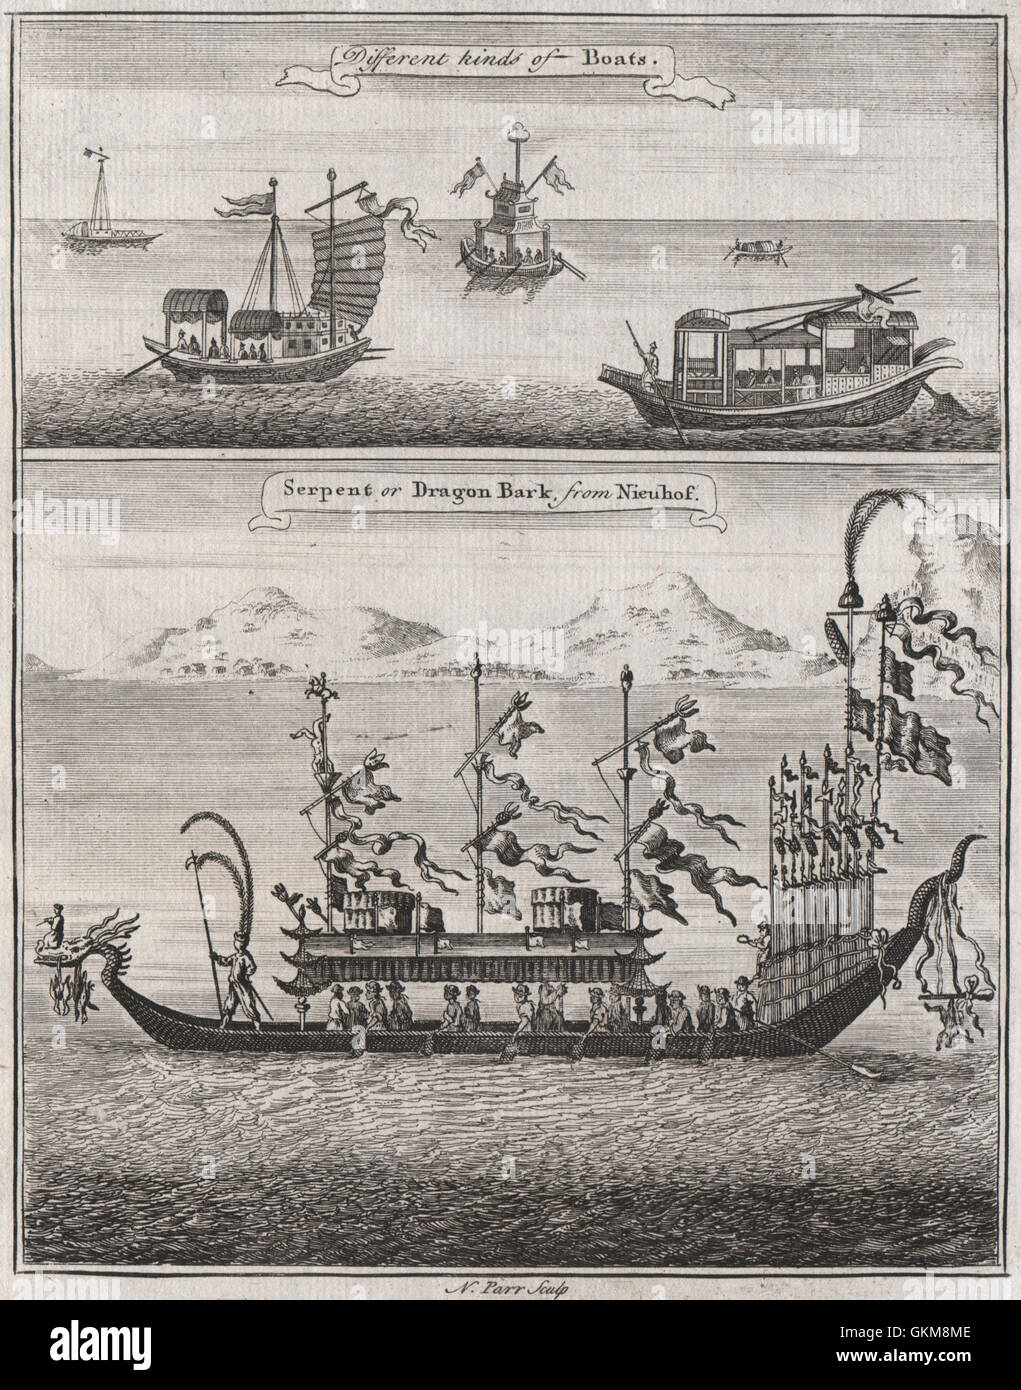 CHINESE BOATS. 'Serpent or Dragon Bark'. Dragon boat. After NIEUHOF, 1746 Stock Photo